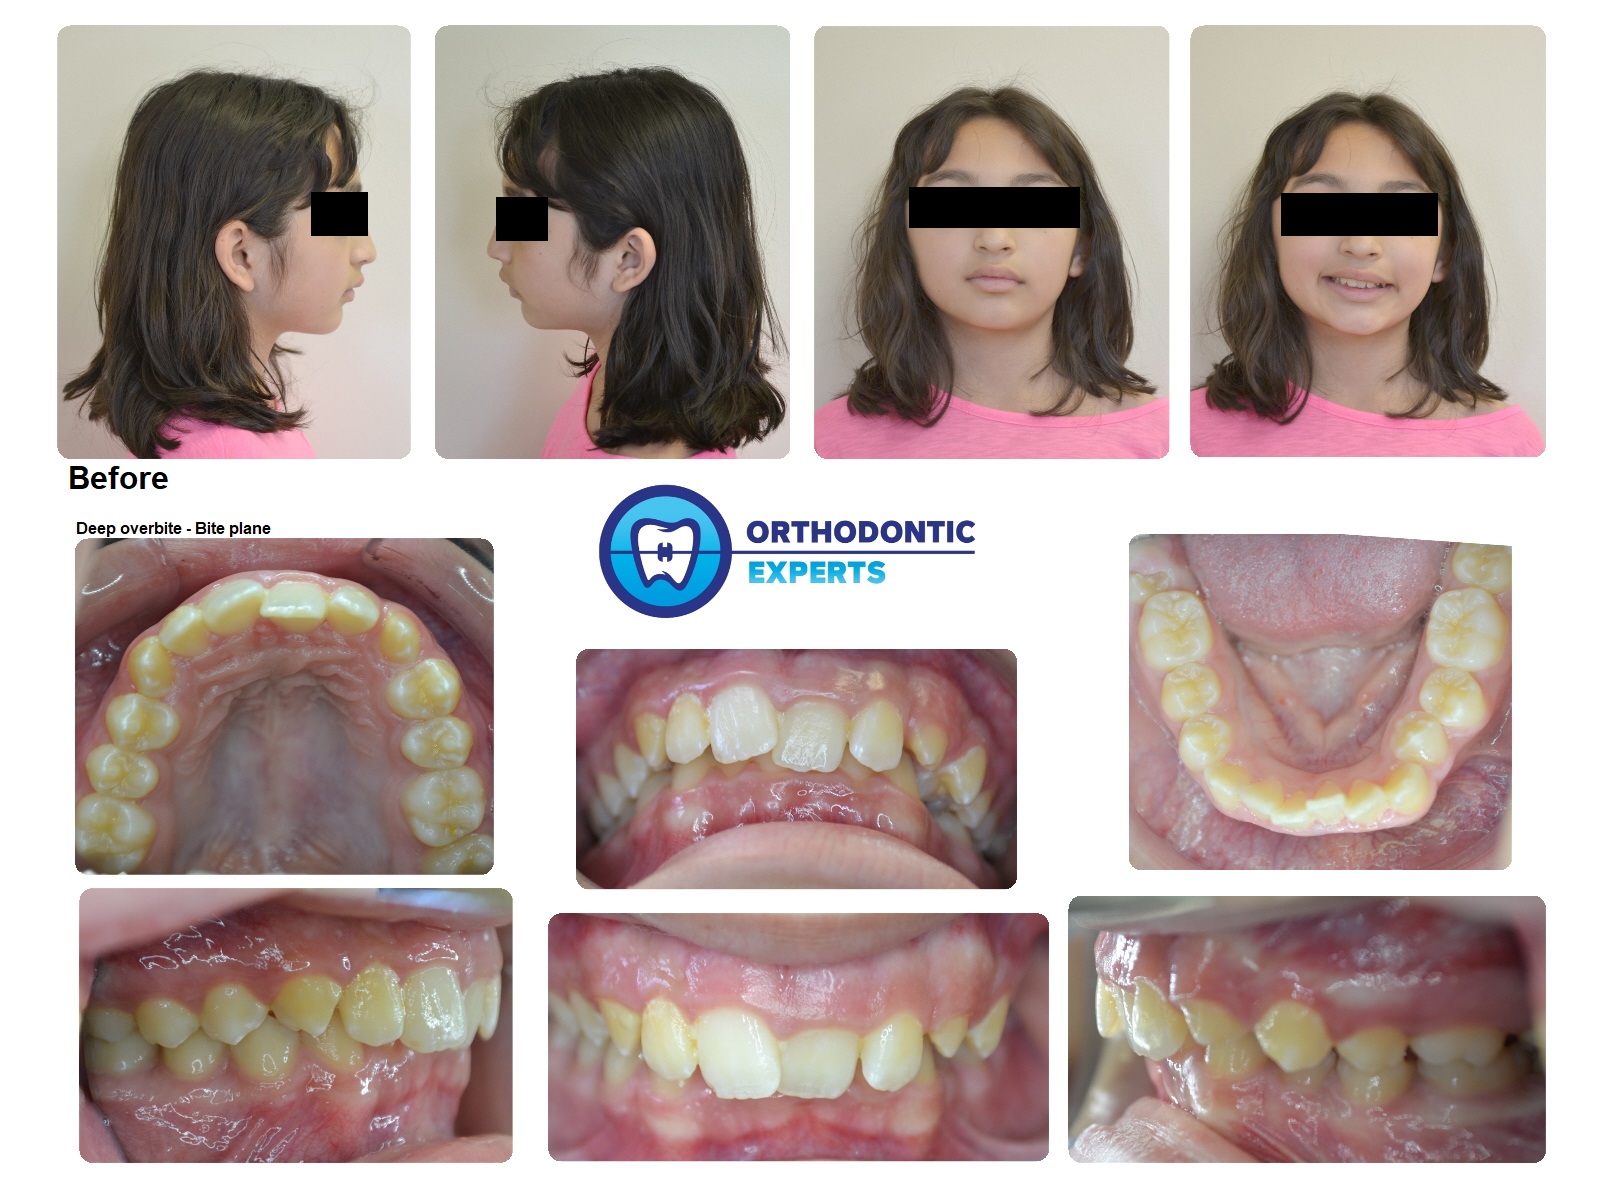 Braces Elastics (Rubber Bands) for Bite Correction and Alignment